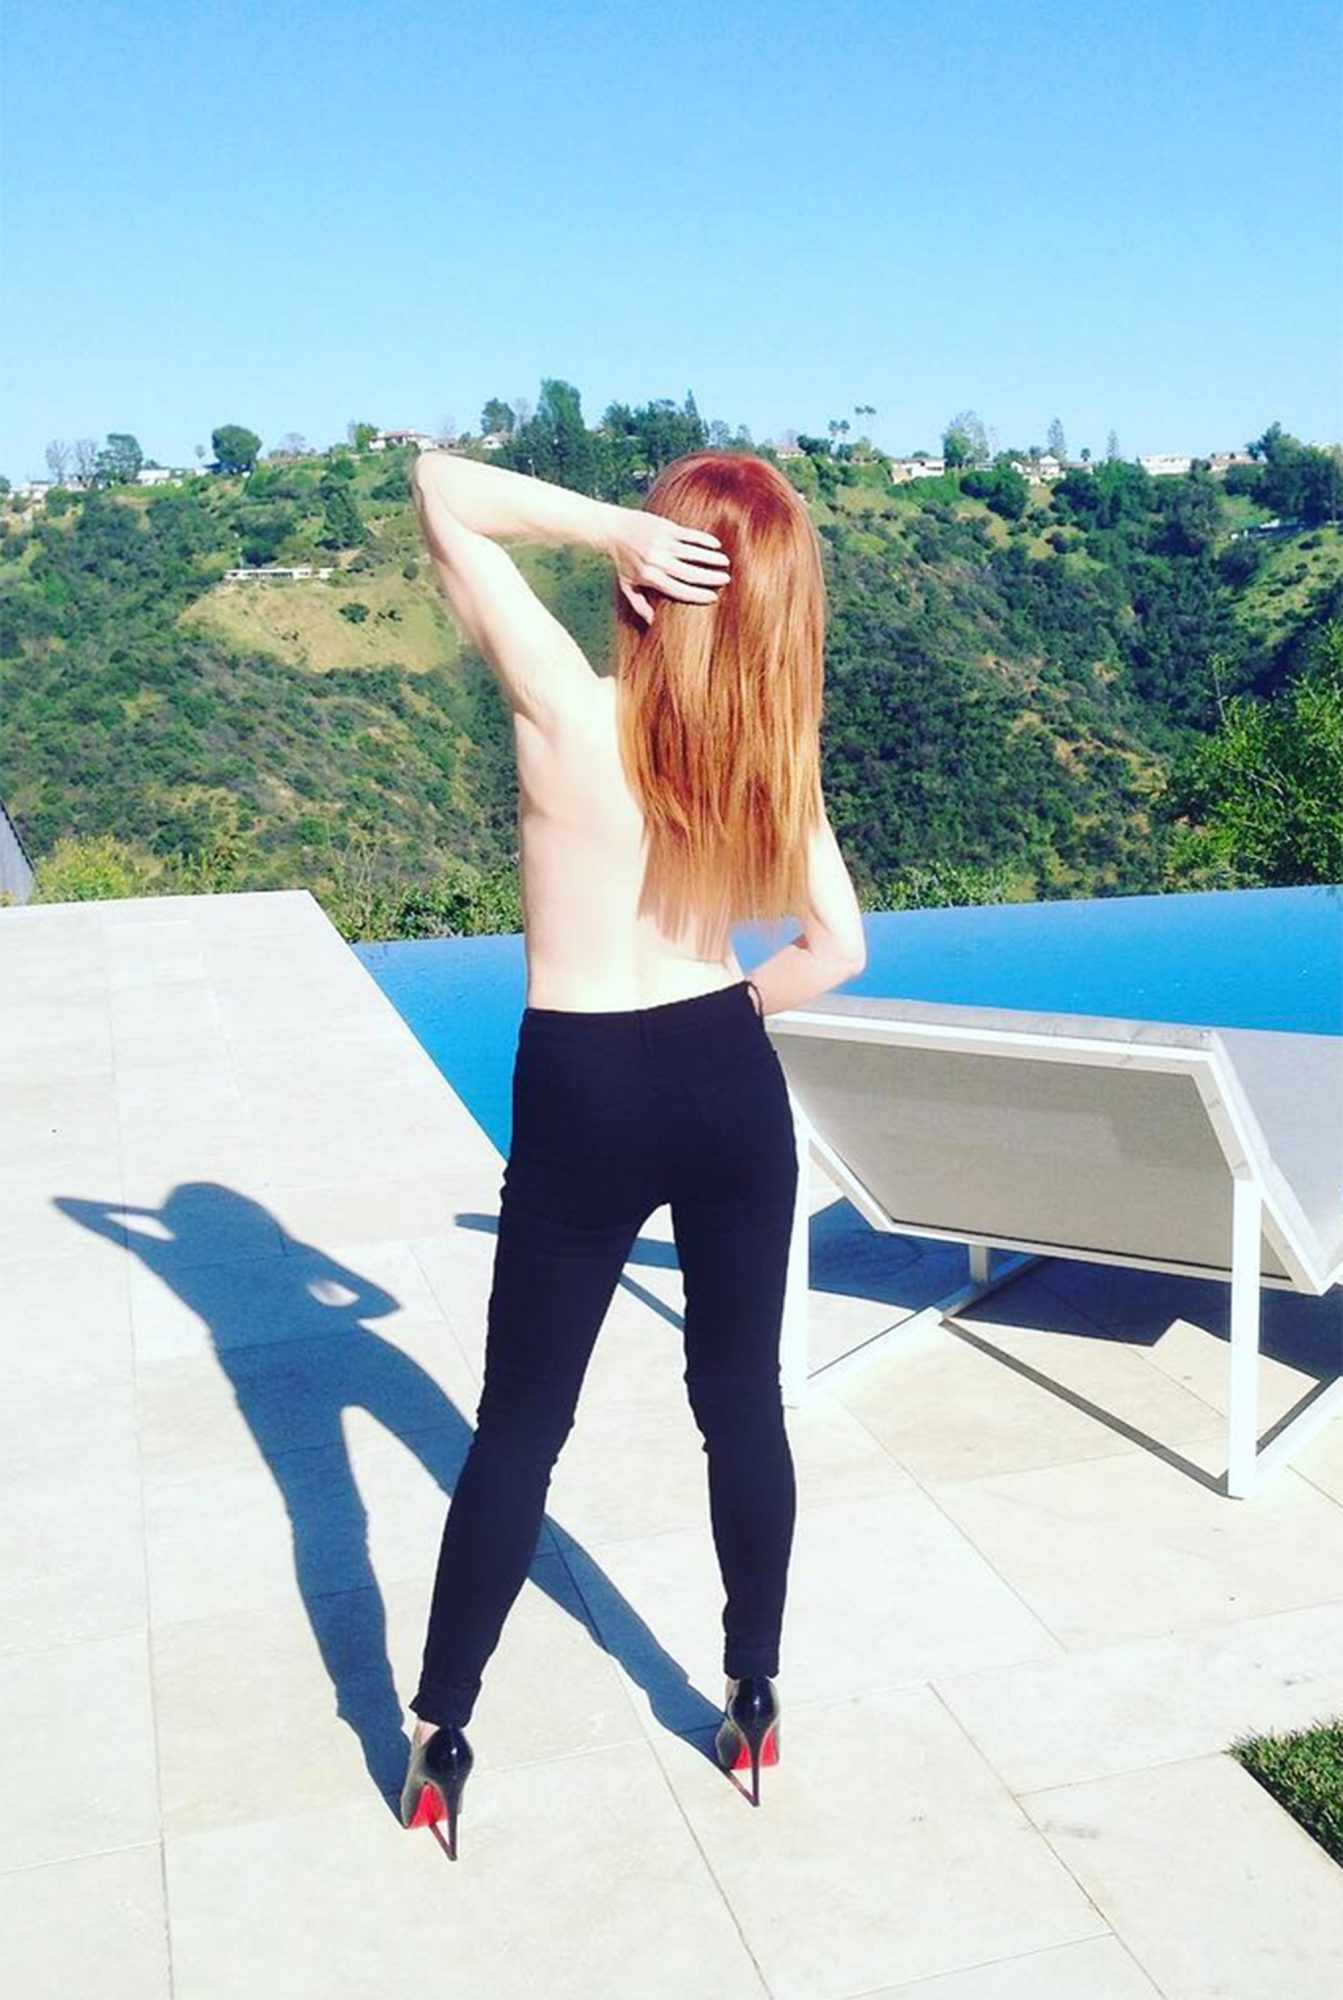 Kathy griffin nude video